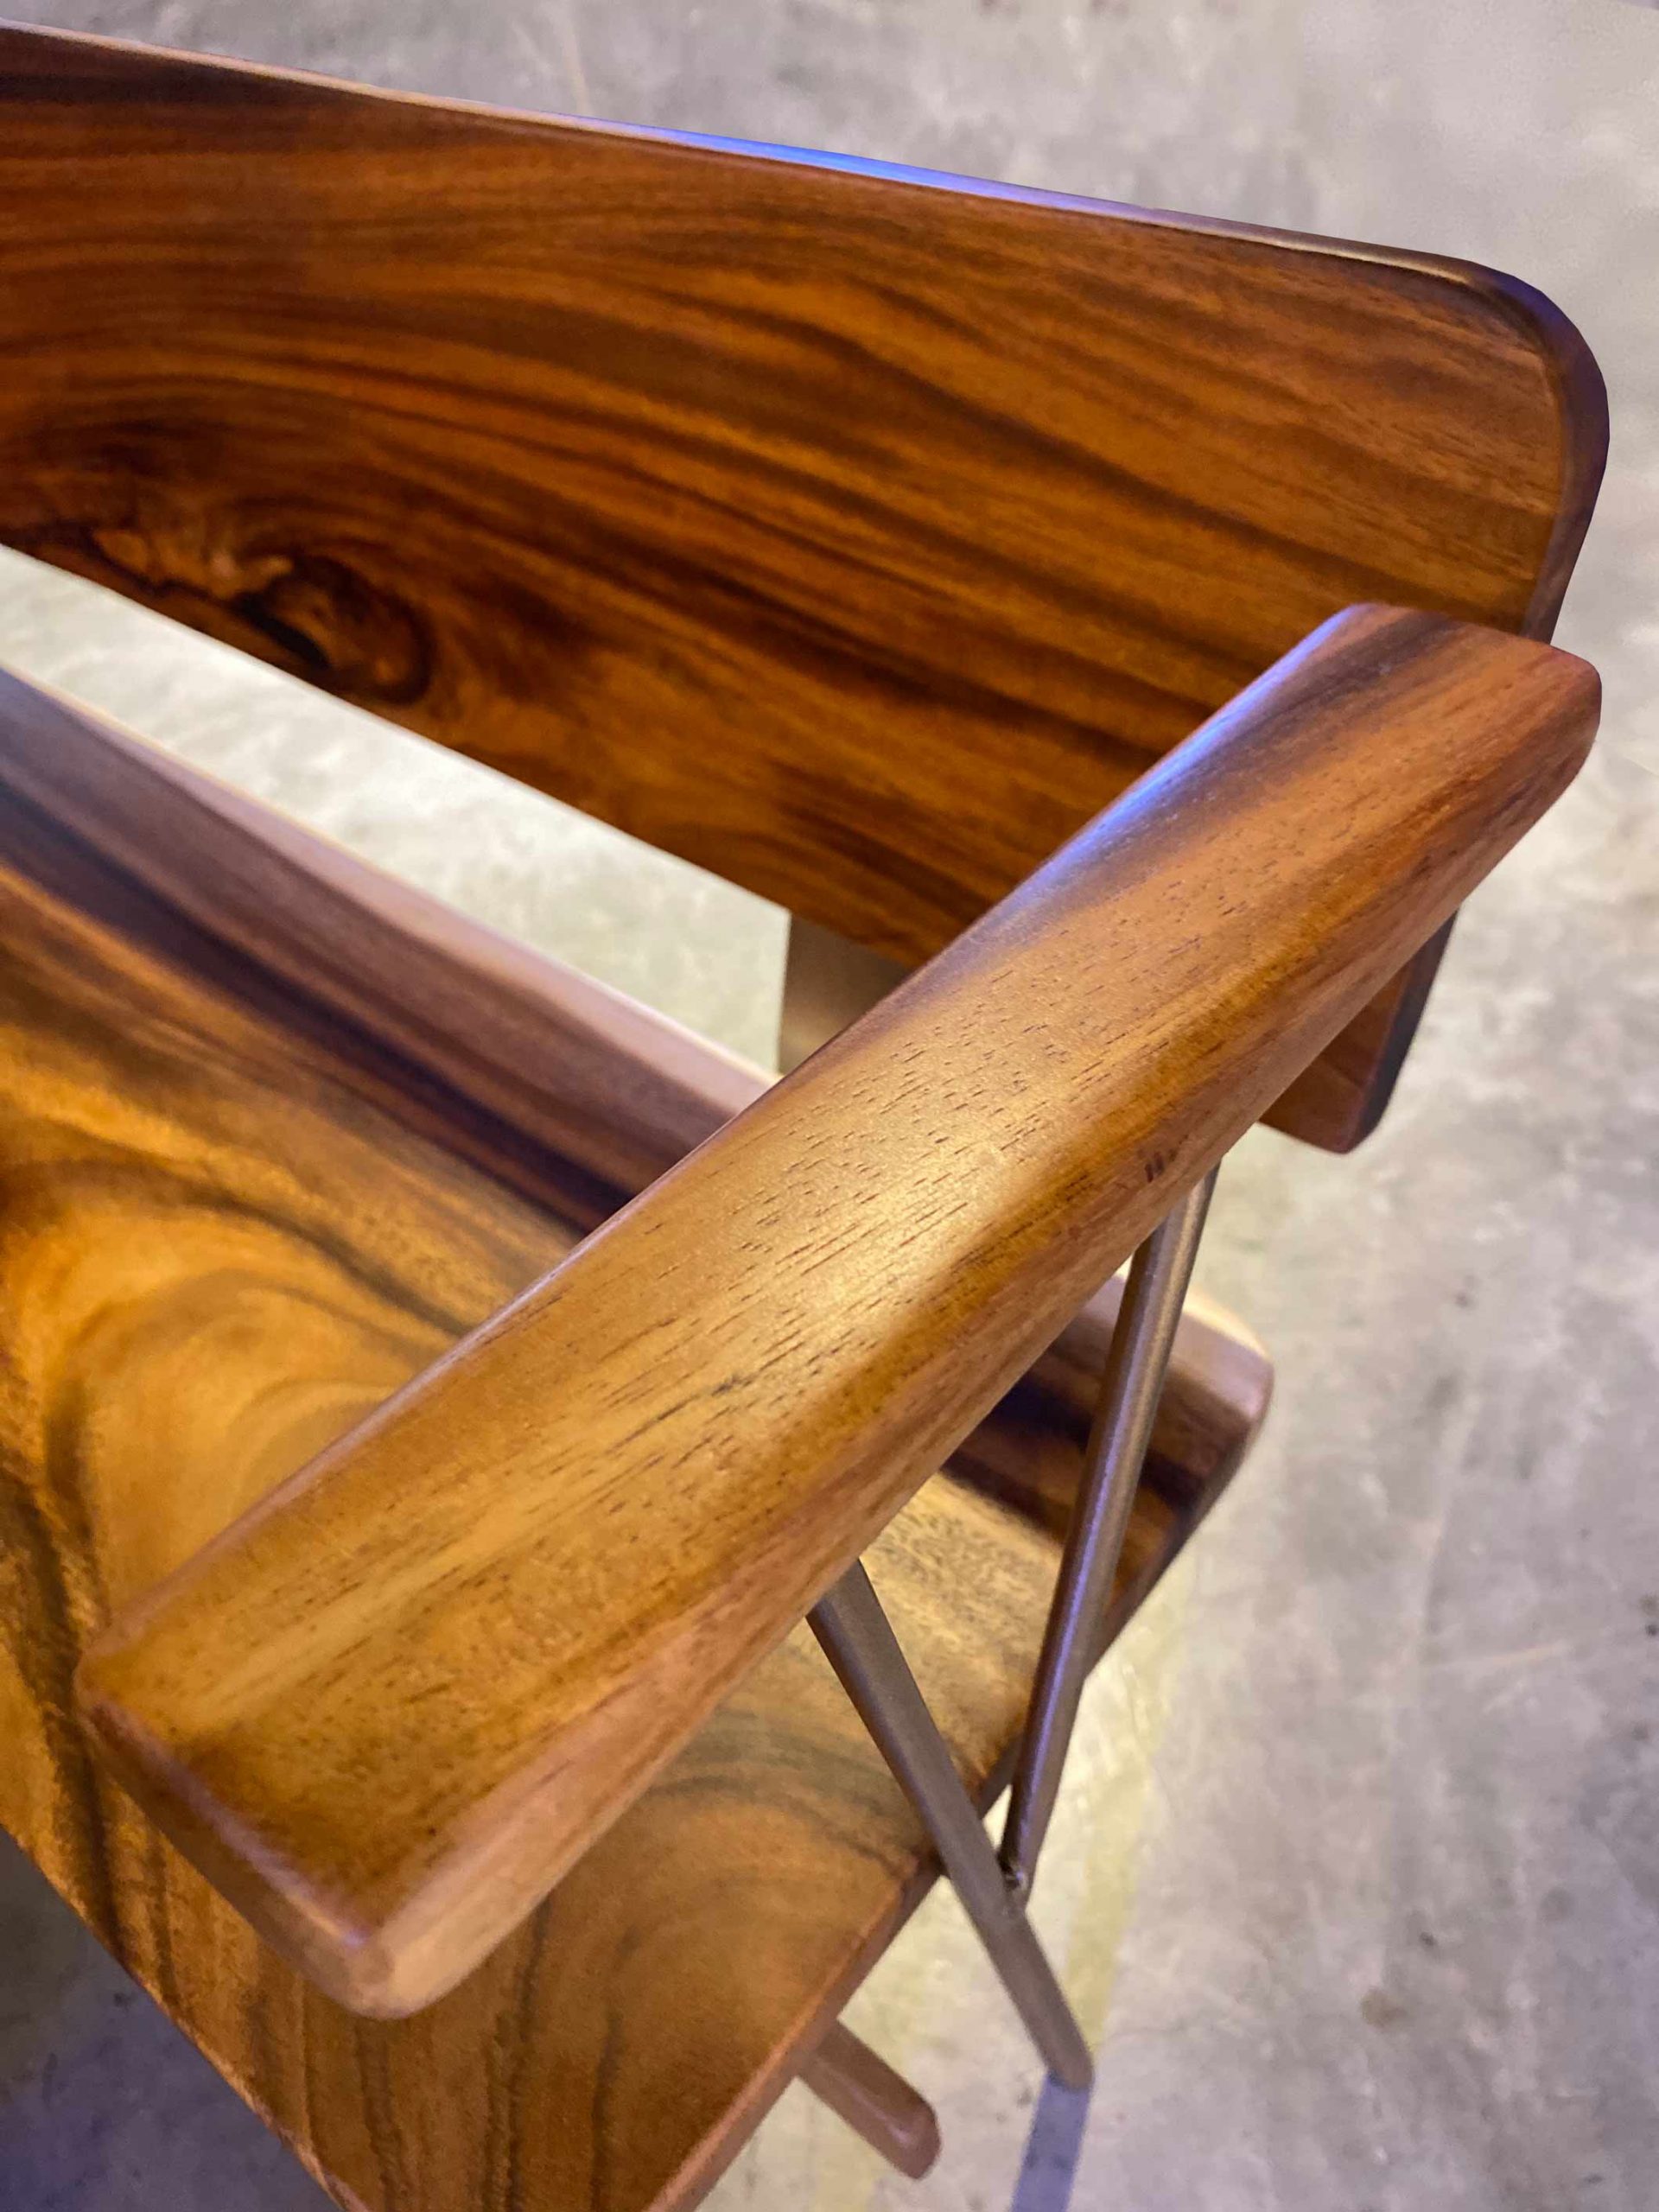 Handcrafted Furniture Singapore Detailing Bench